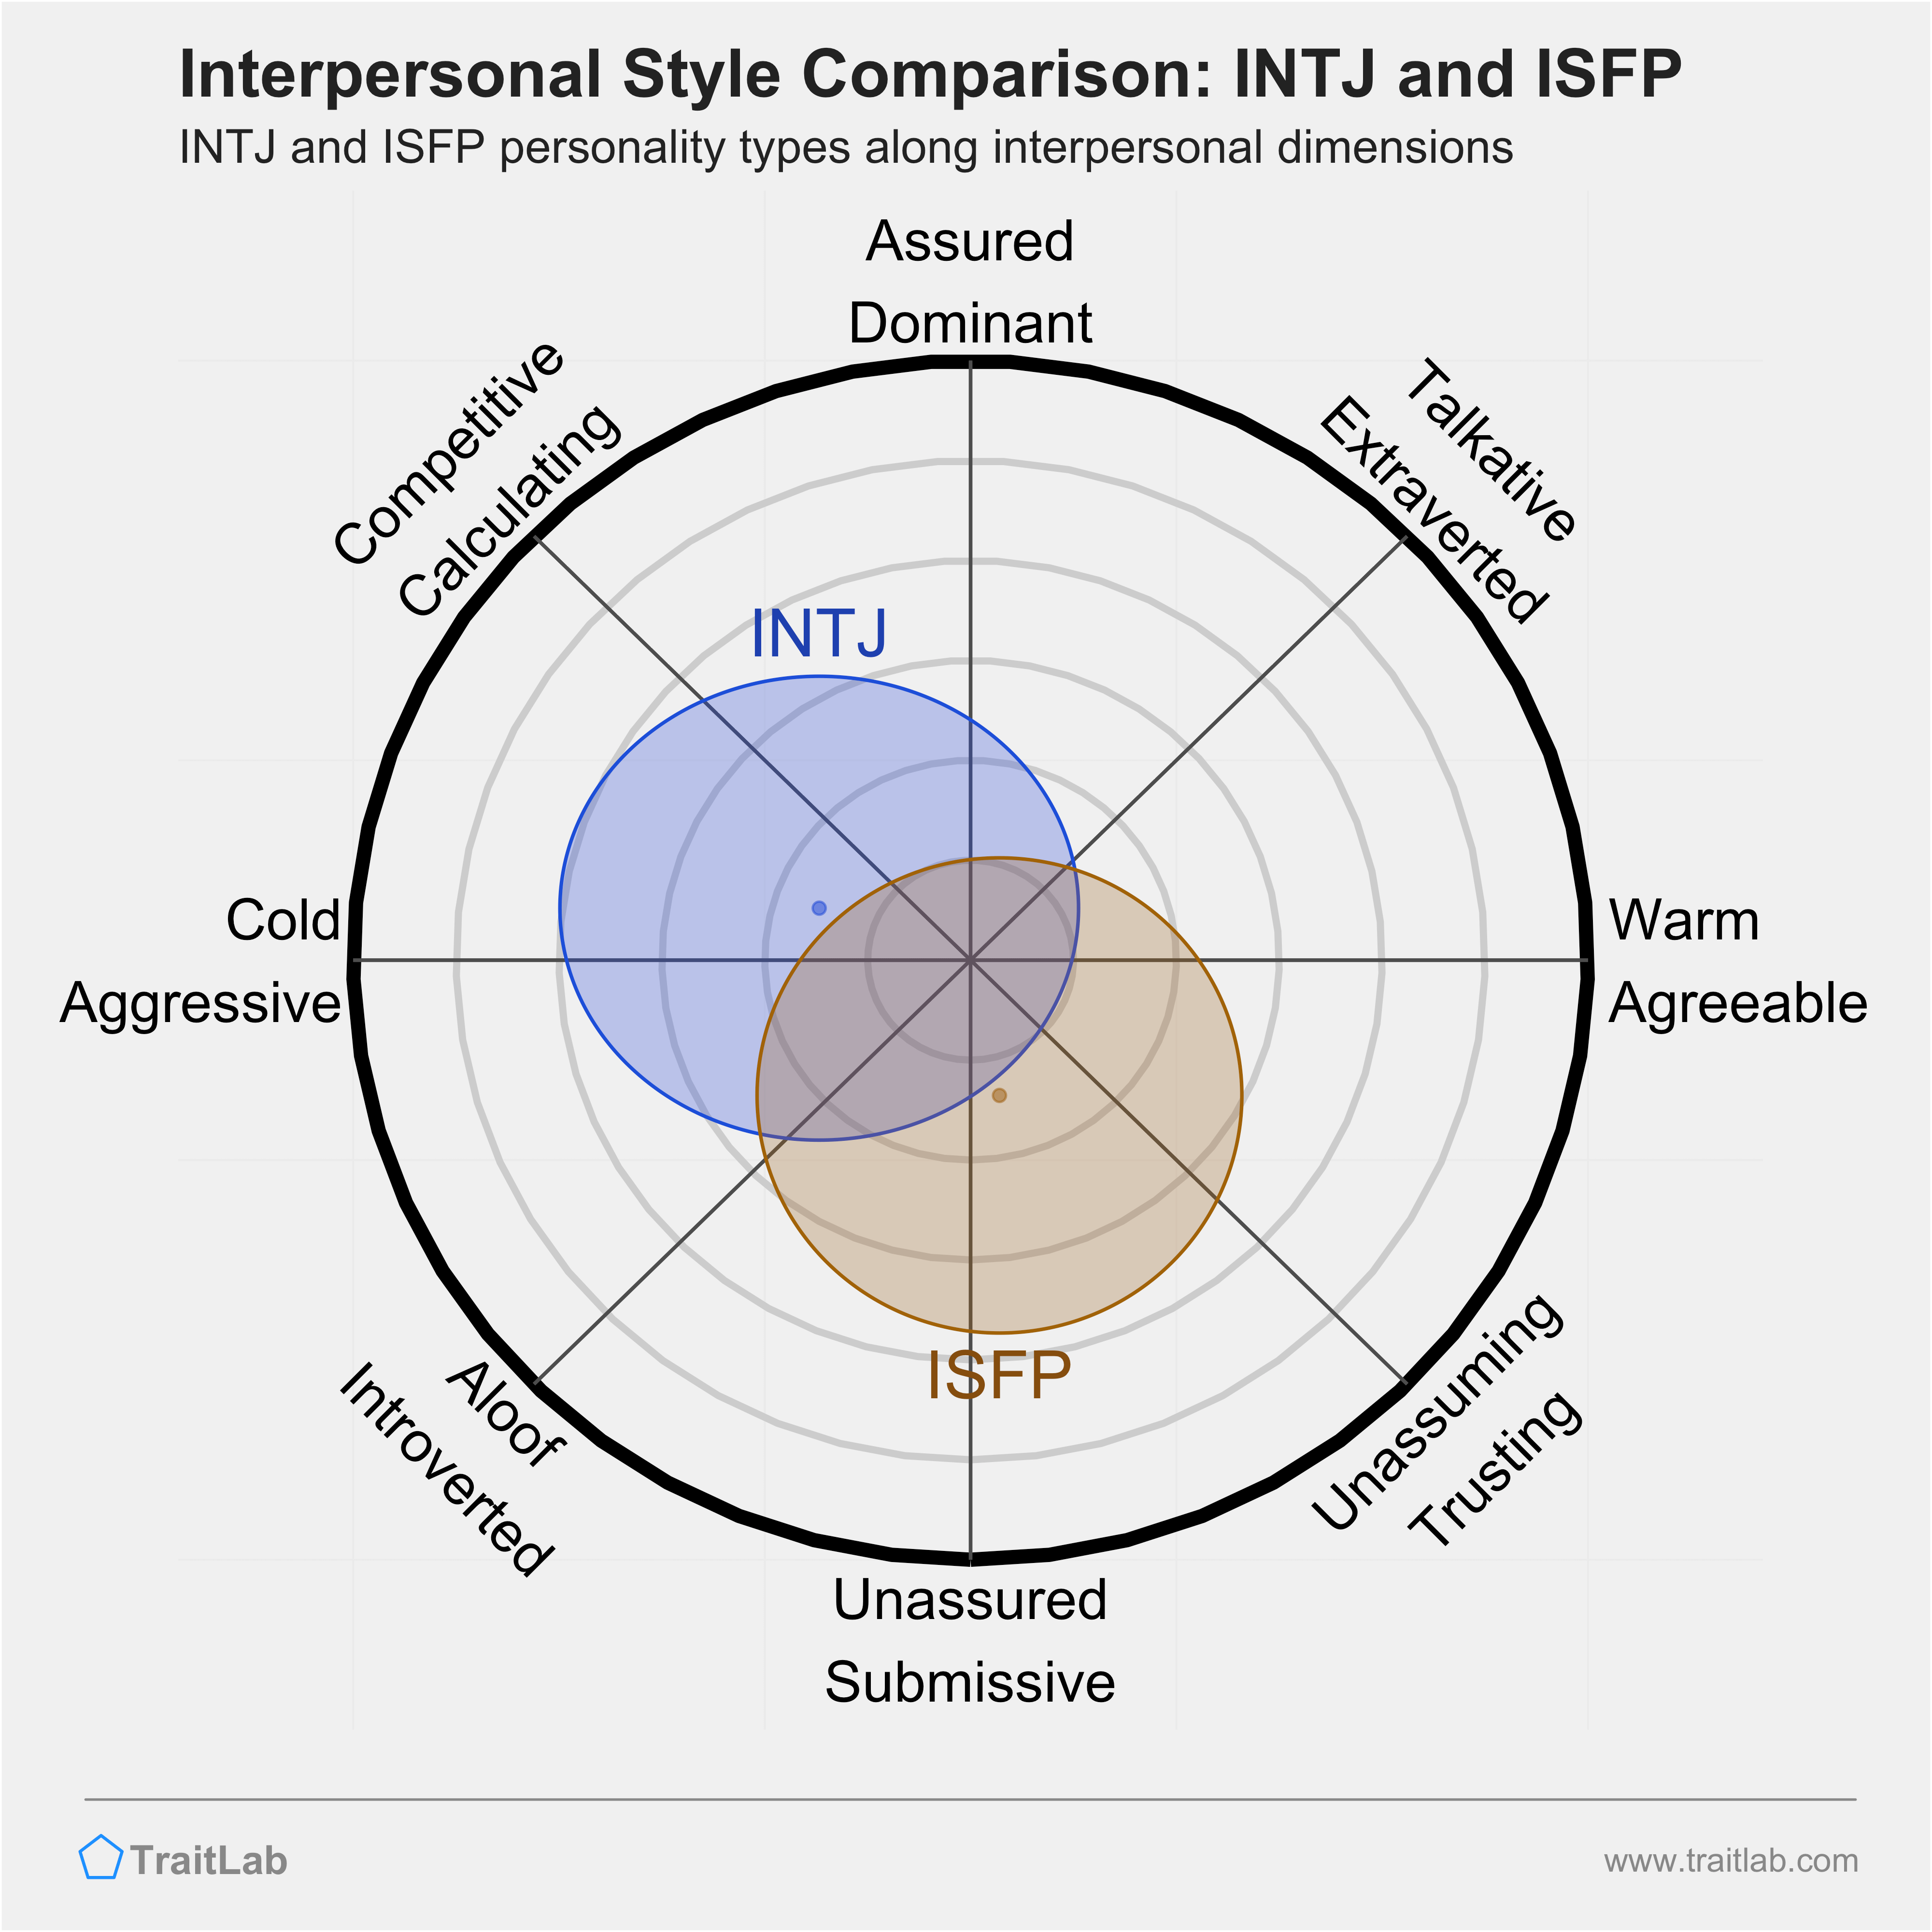 INTJ and ISFP comparison across interpersonal dimensions